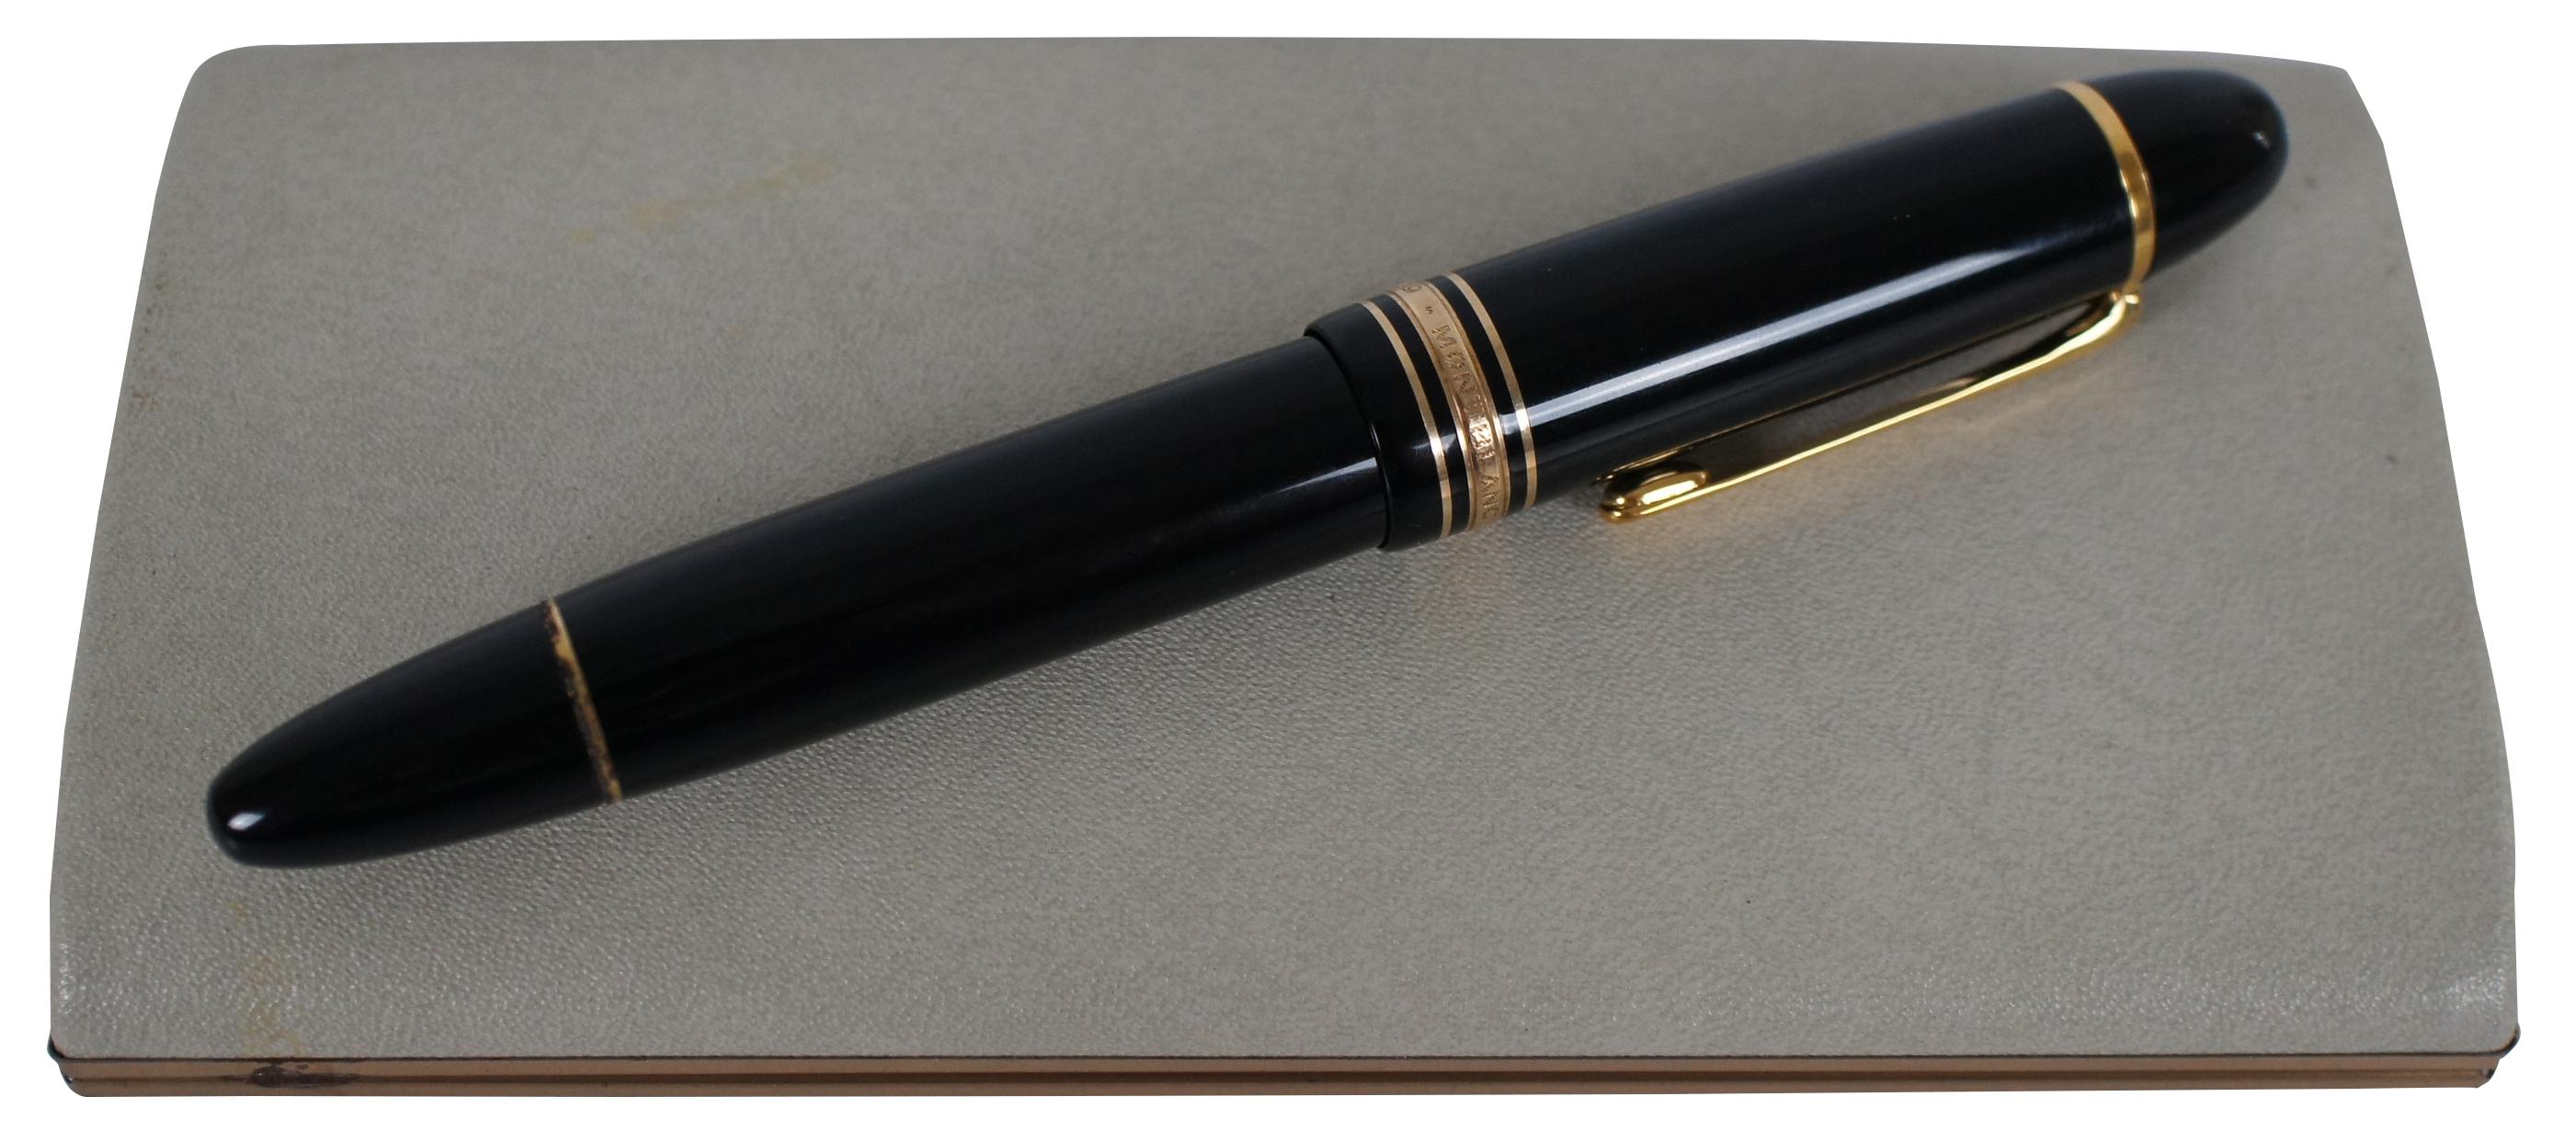 Vintage Montblanc Meisterstuck No 149 black reservoir style fountain pen with two tone 4810 14K gold 585; includes box.

Measures: 5.75” x 0.75” / Box - 6.5” x 3.25” x 1” (Length x Width x Depth).